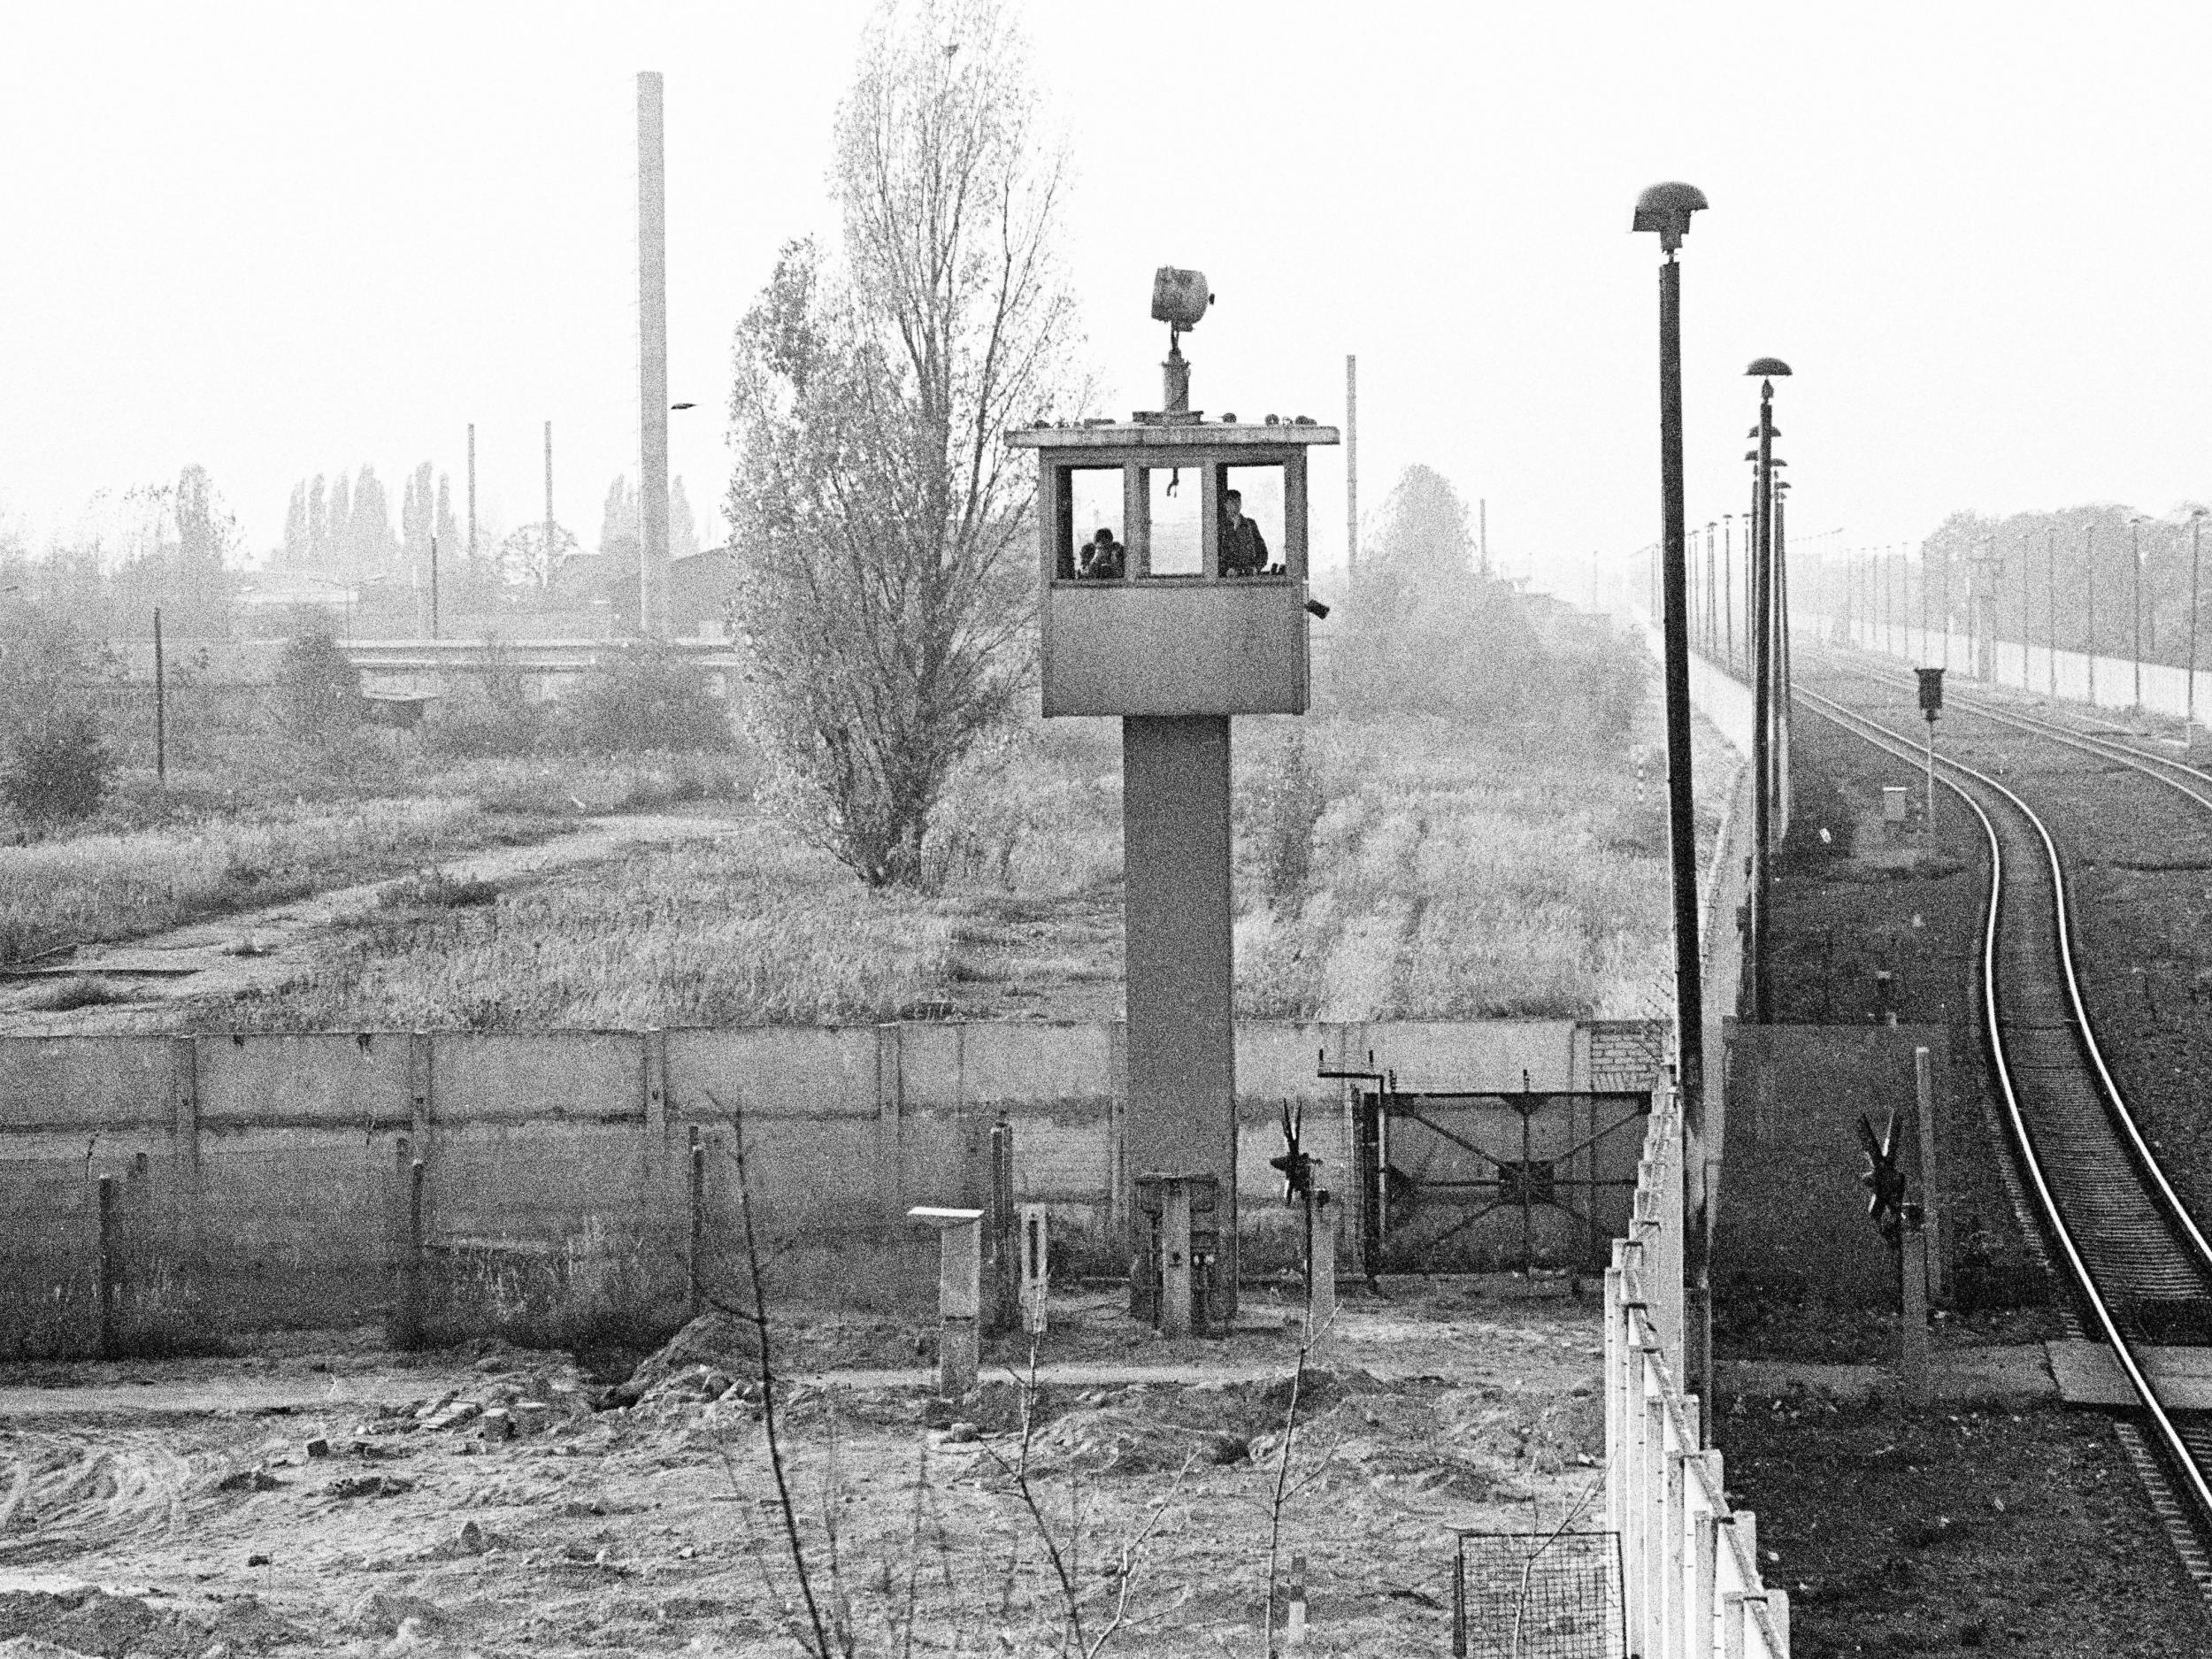 The Berlin Wall and watch tower at Staaken during the Cold War